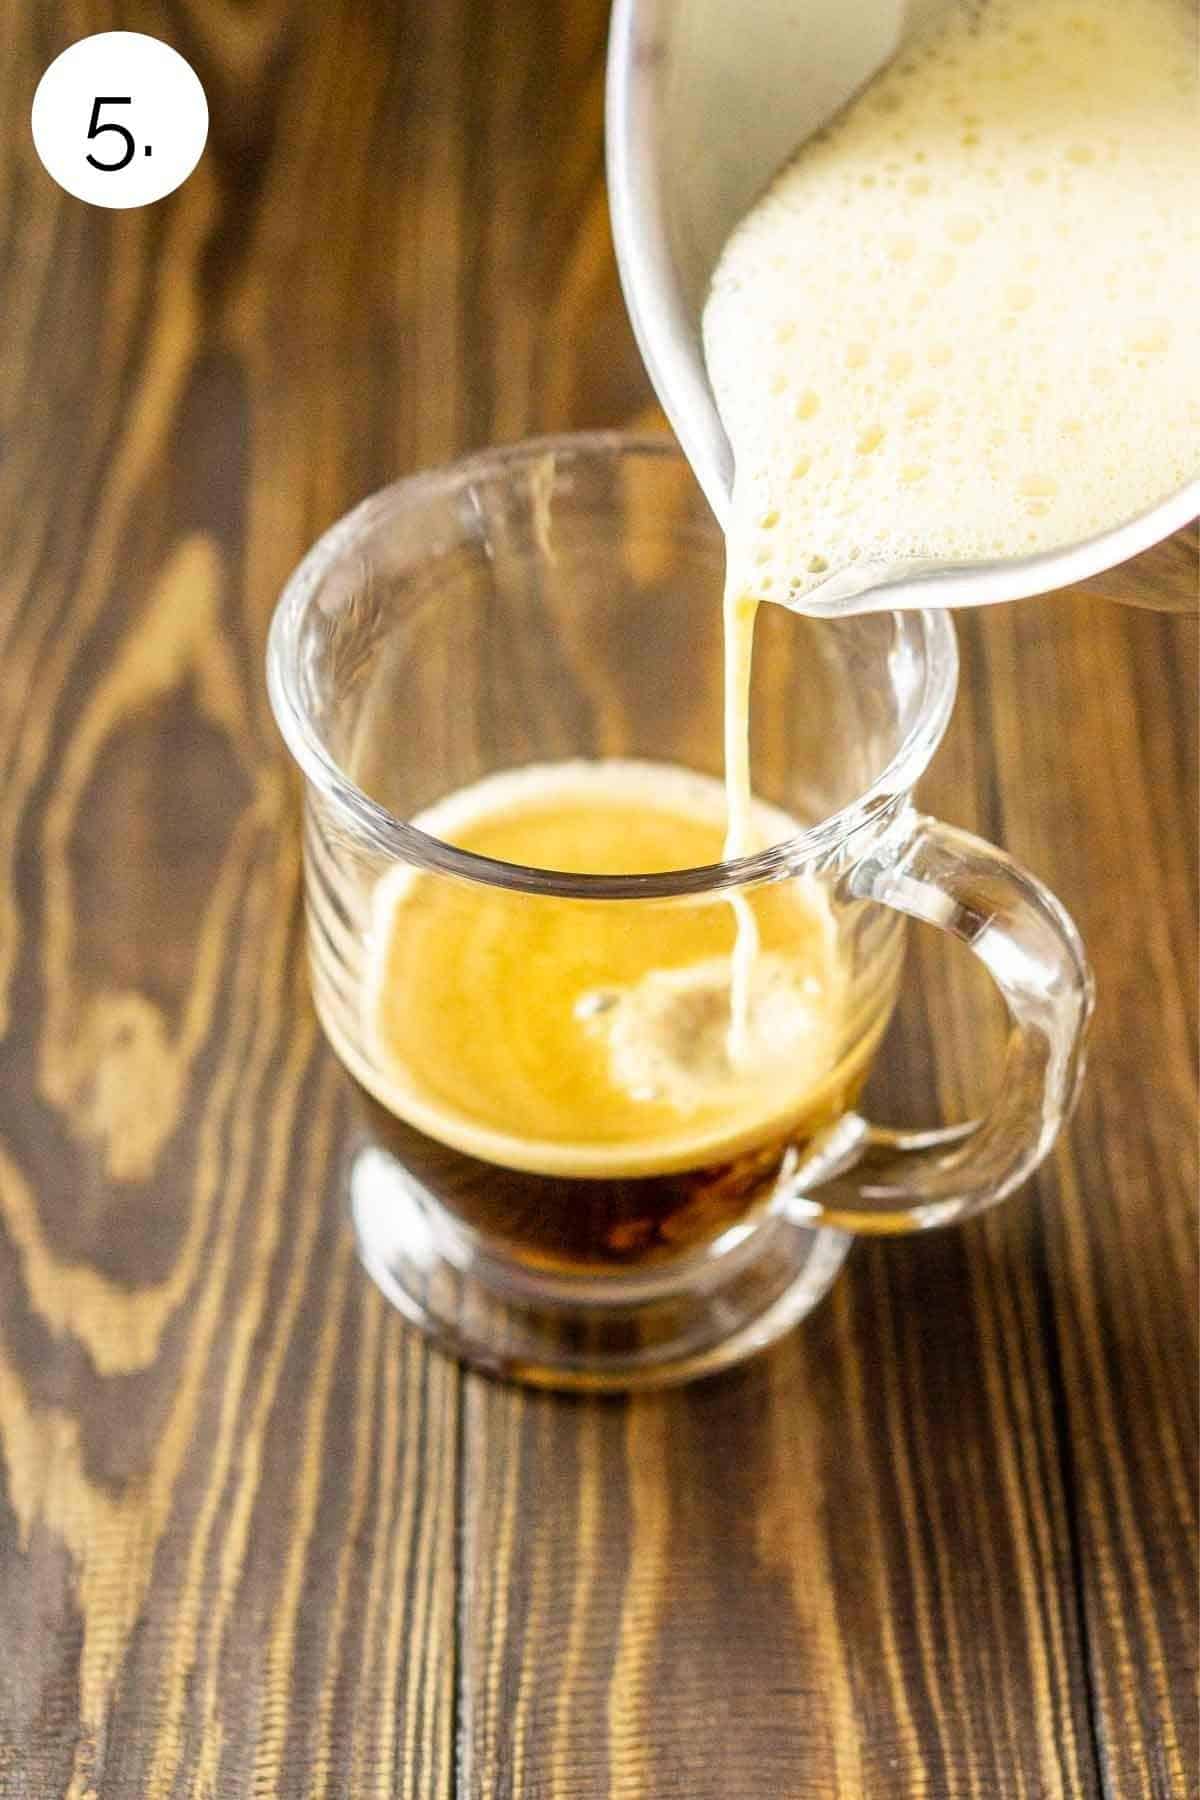 Pouring the frothed eggnog into a latte cup with espresso.